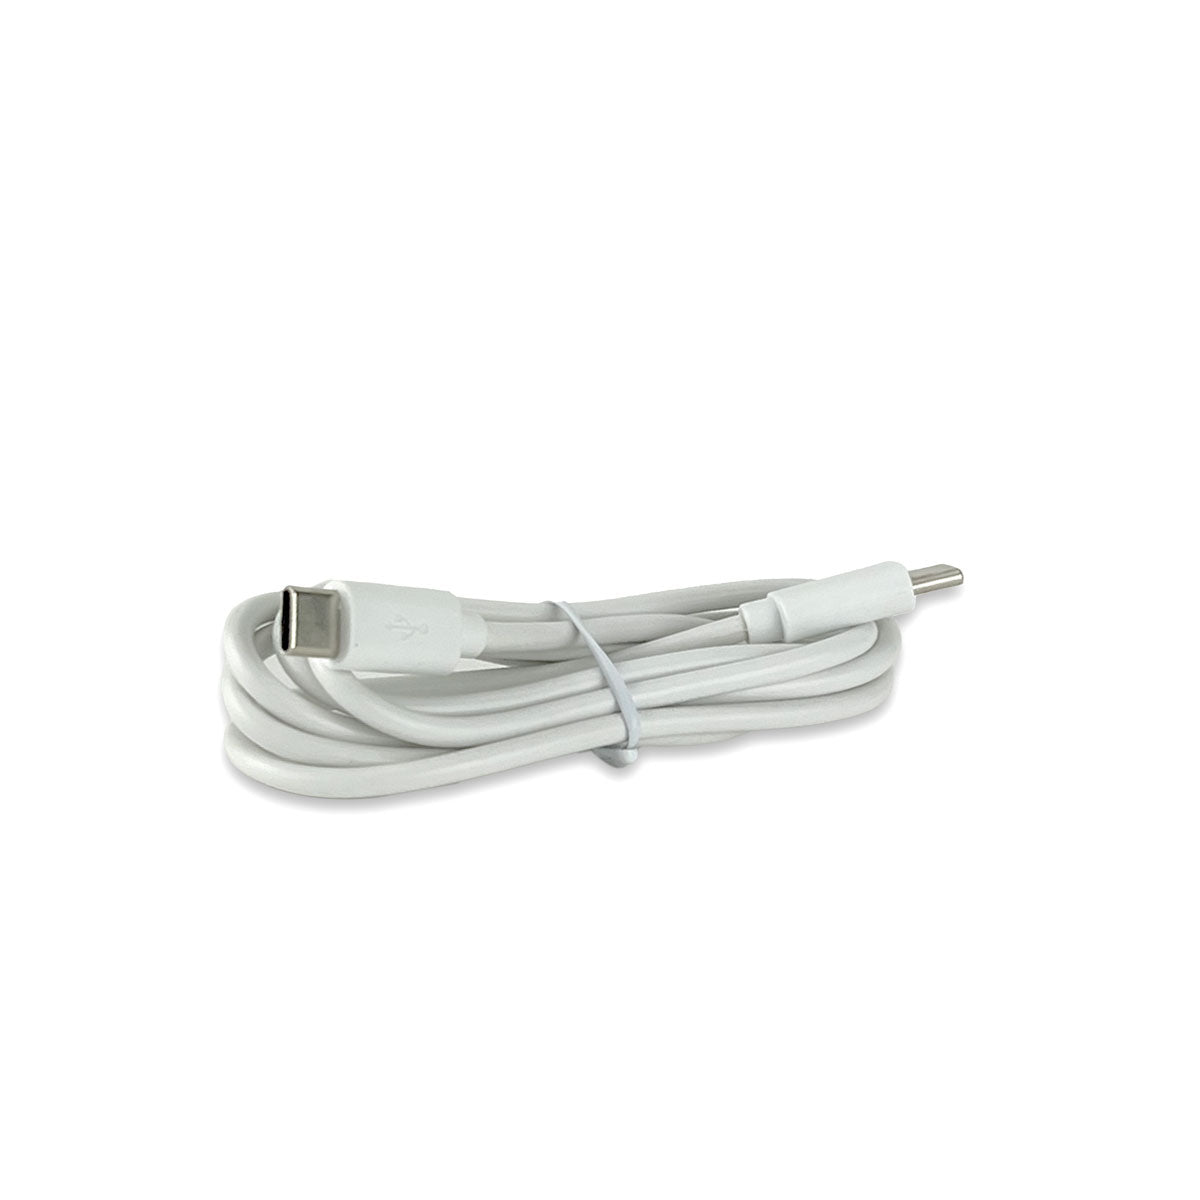 Charge Cable USB-C To USB-C, 1M - White